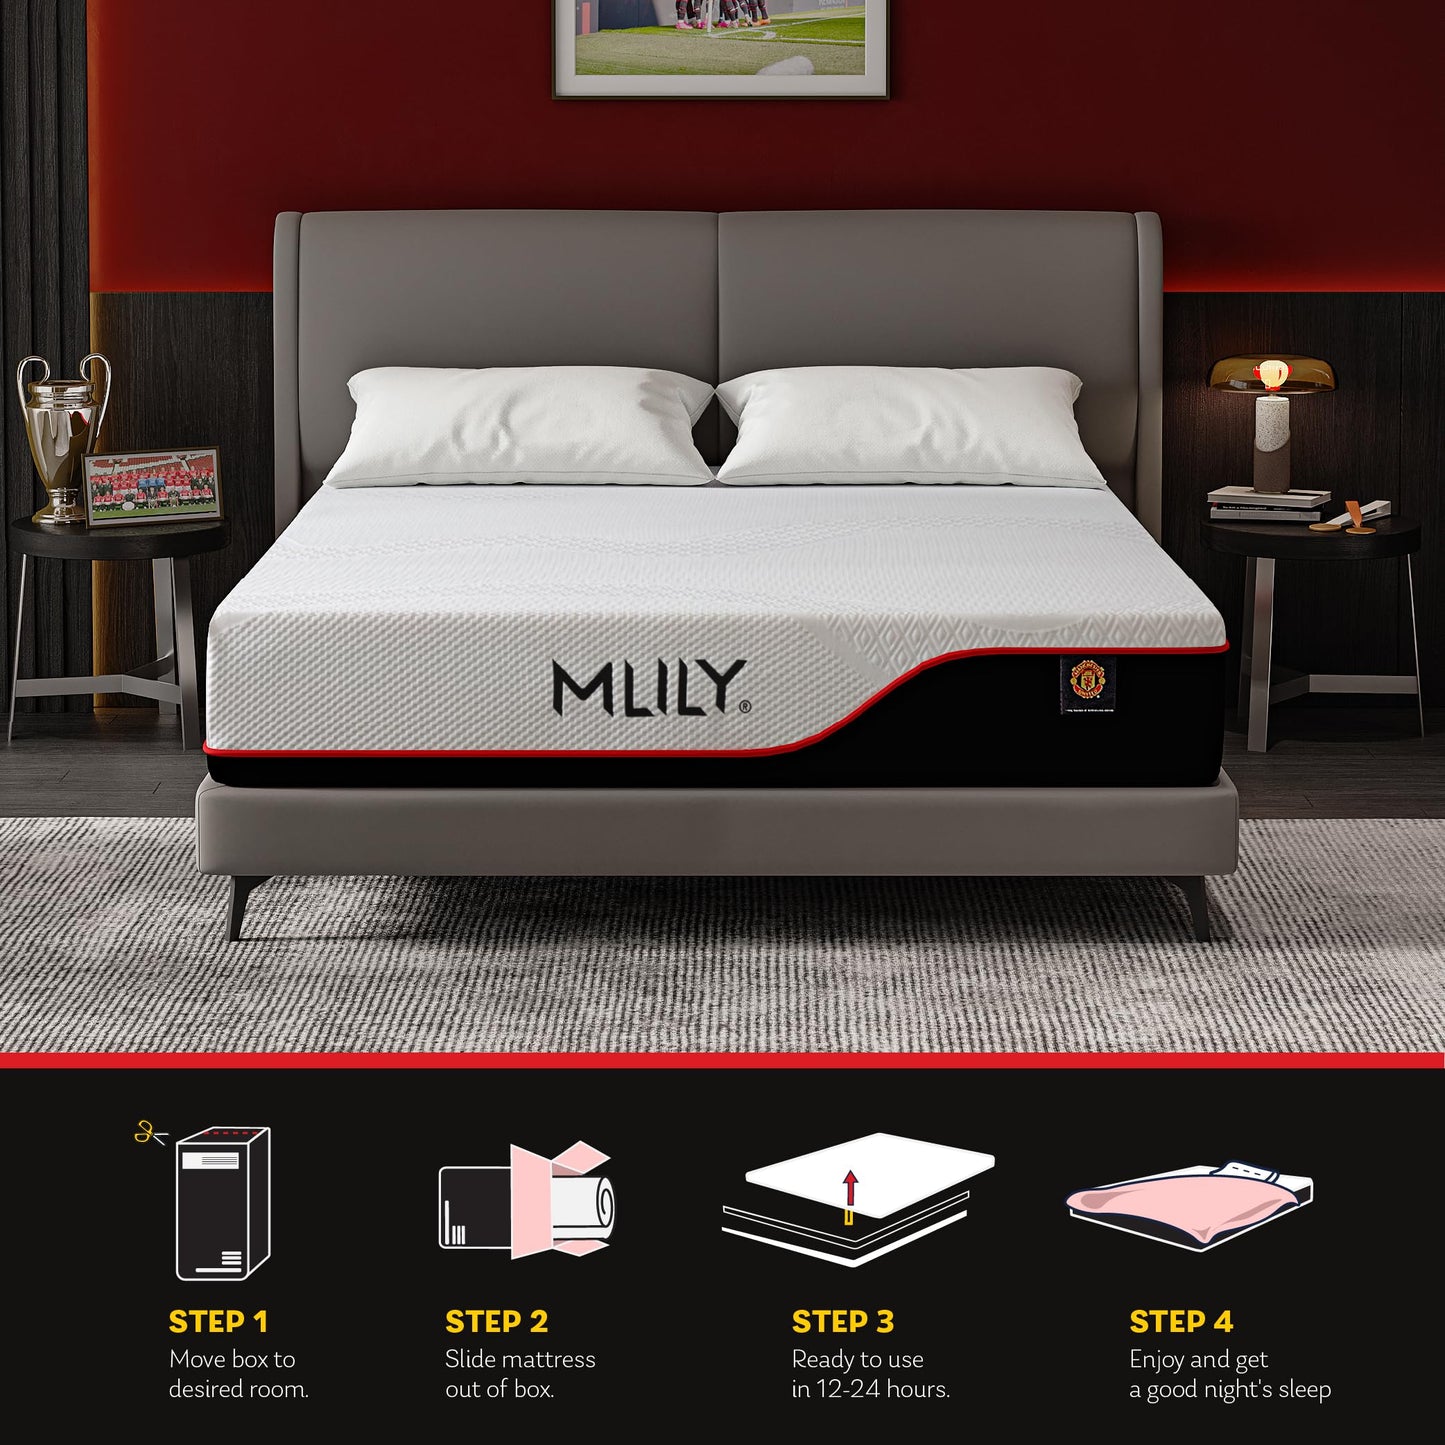 MLILY Cal King Mattress, Manchester United 12 Inch Memory Foam Mattress, Cool Sleep & Pressure Relief, Made in USA, White